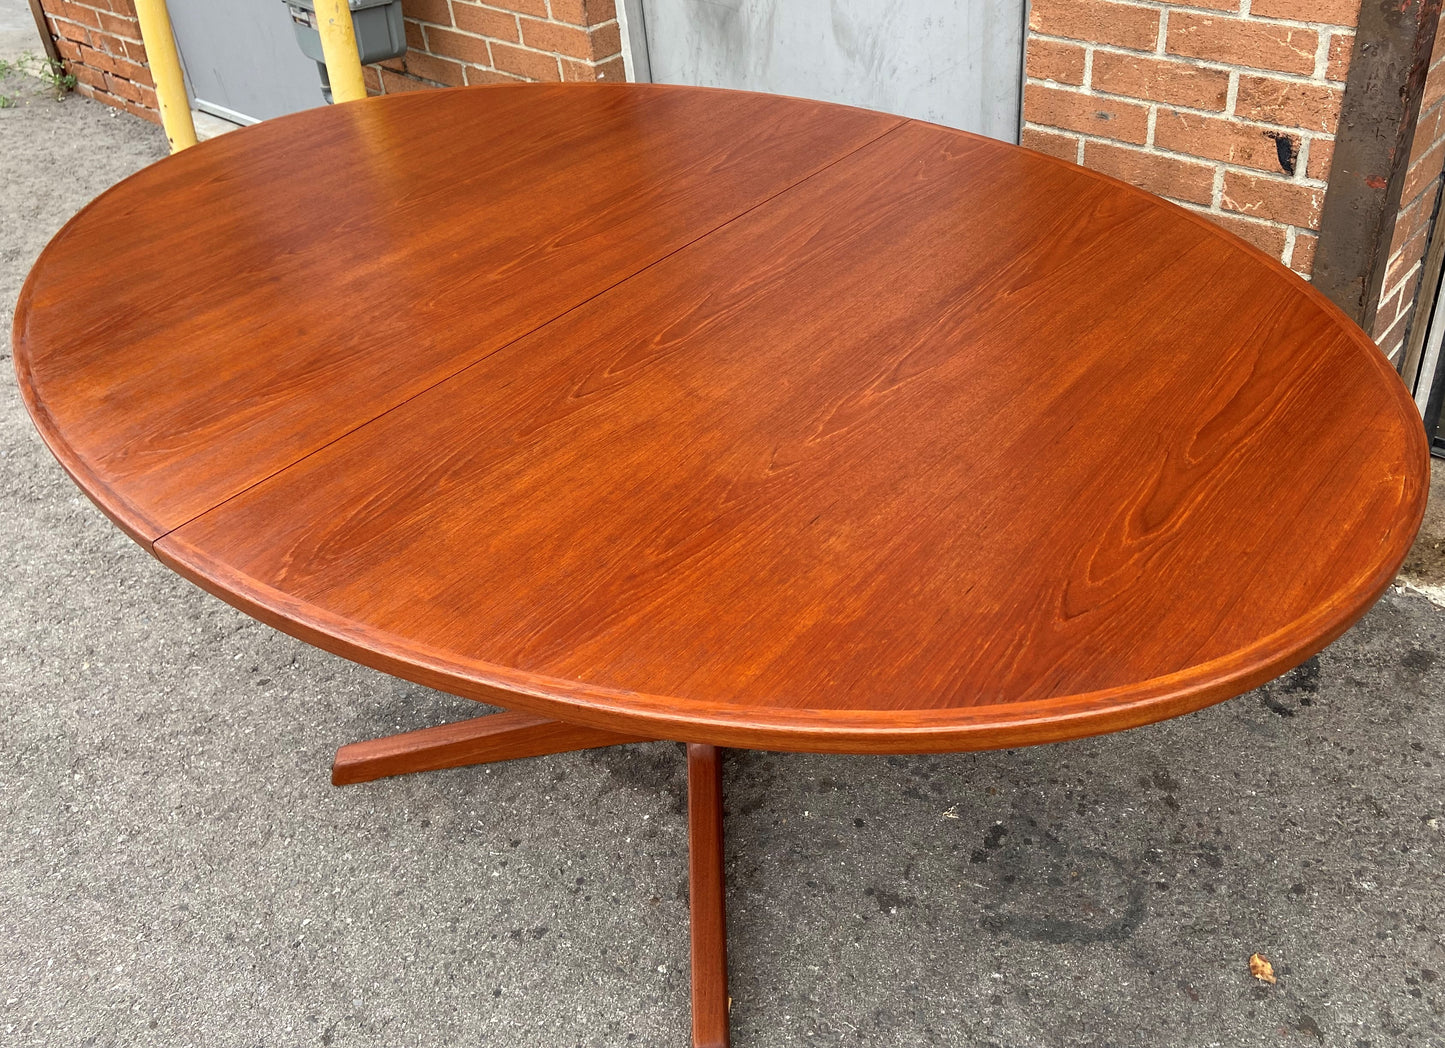 REFINISHED Danish Mid Century Modern Teak Dining Table Oval w 2 Leaves, 68"-106"